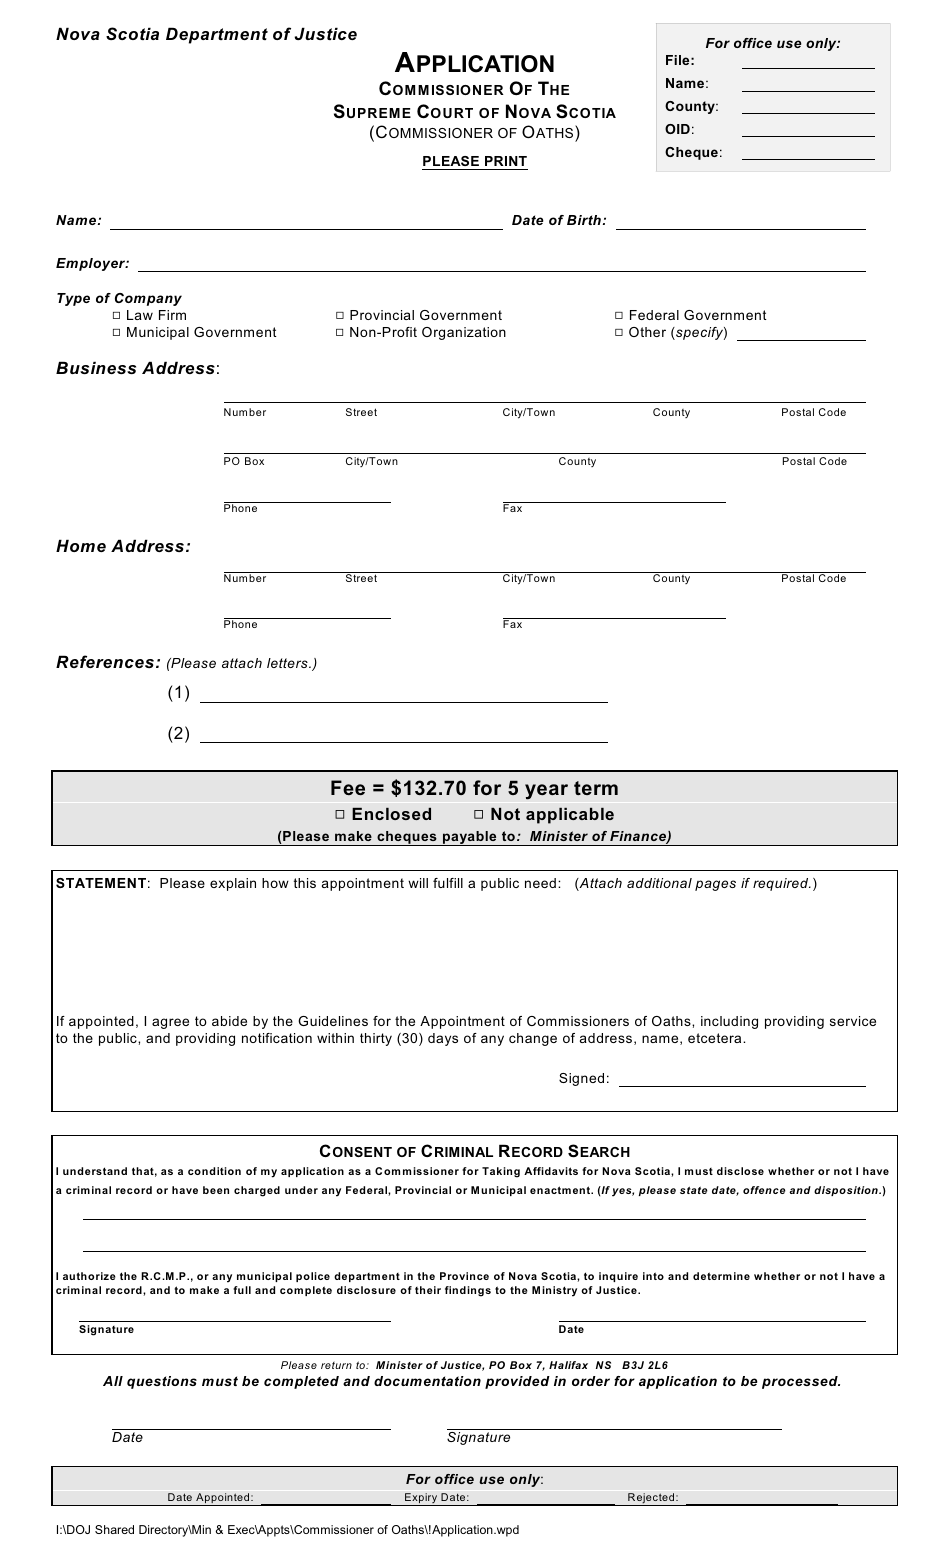 Commissioner of Oaths Application Form - Nova Scotia, Canada, Page 1